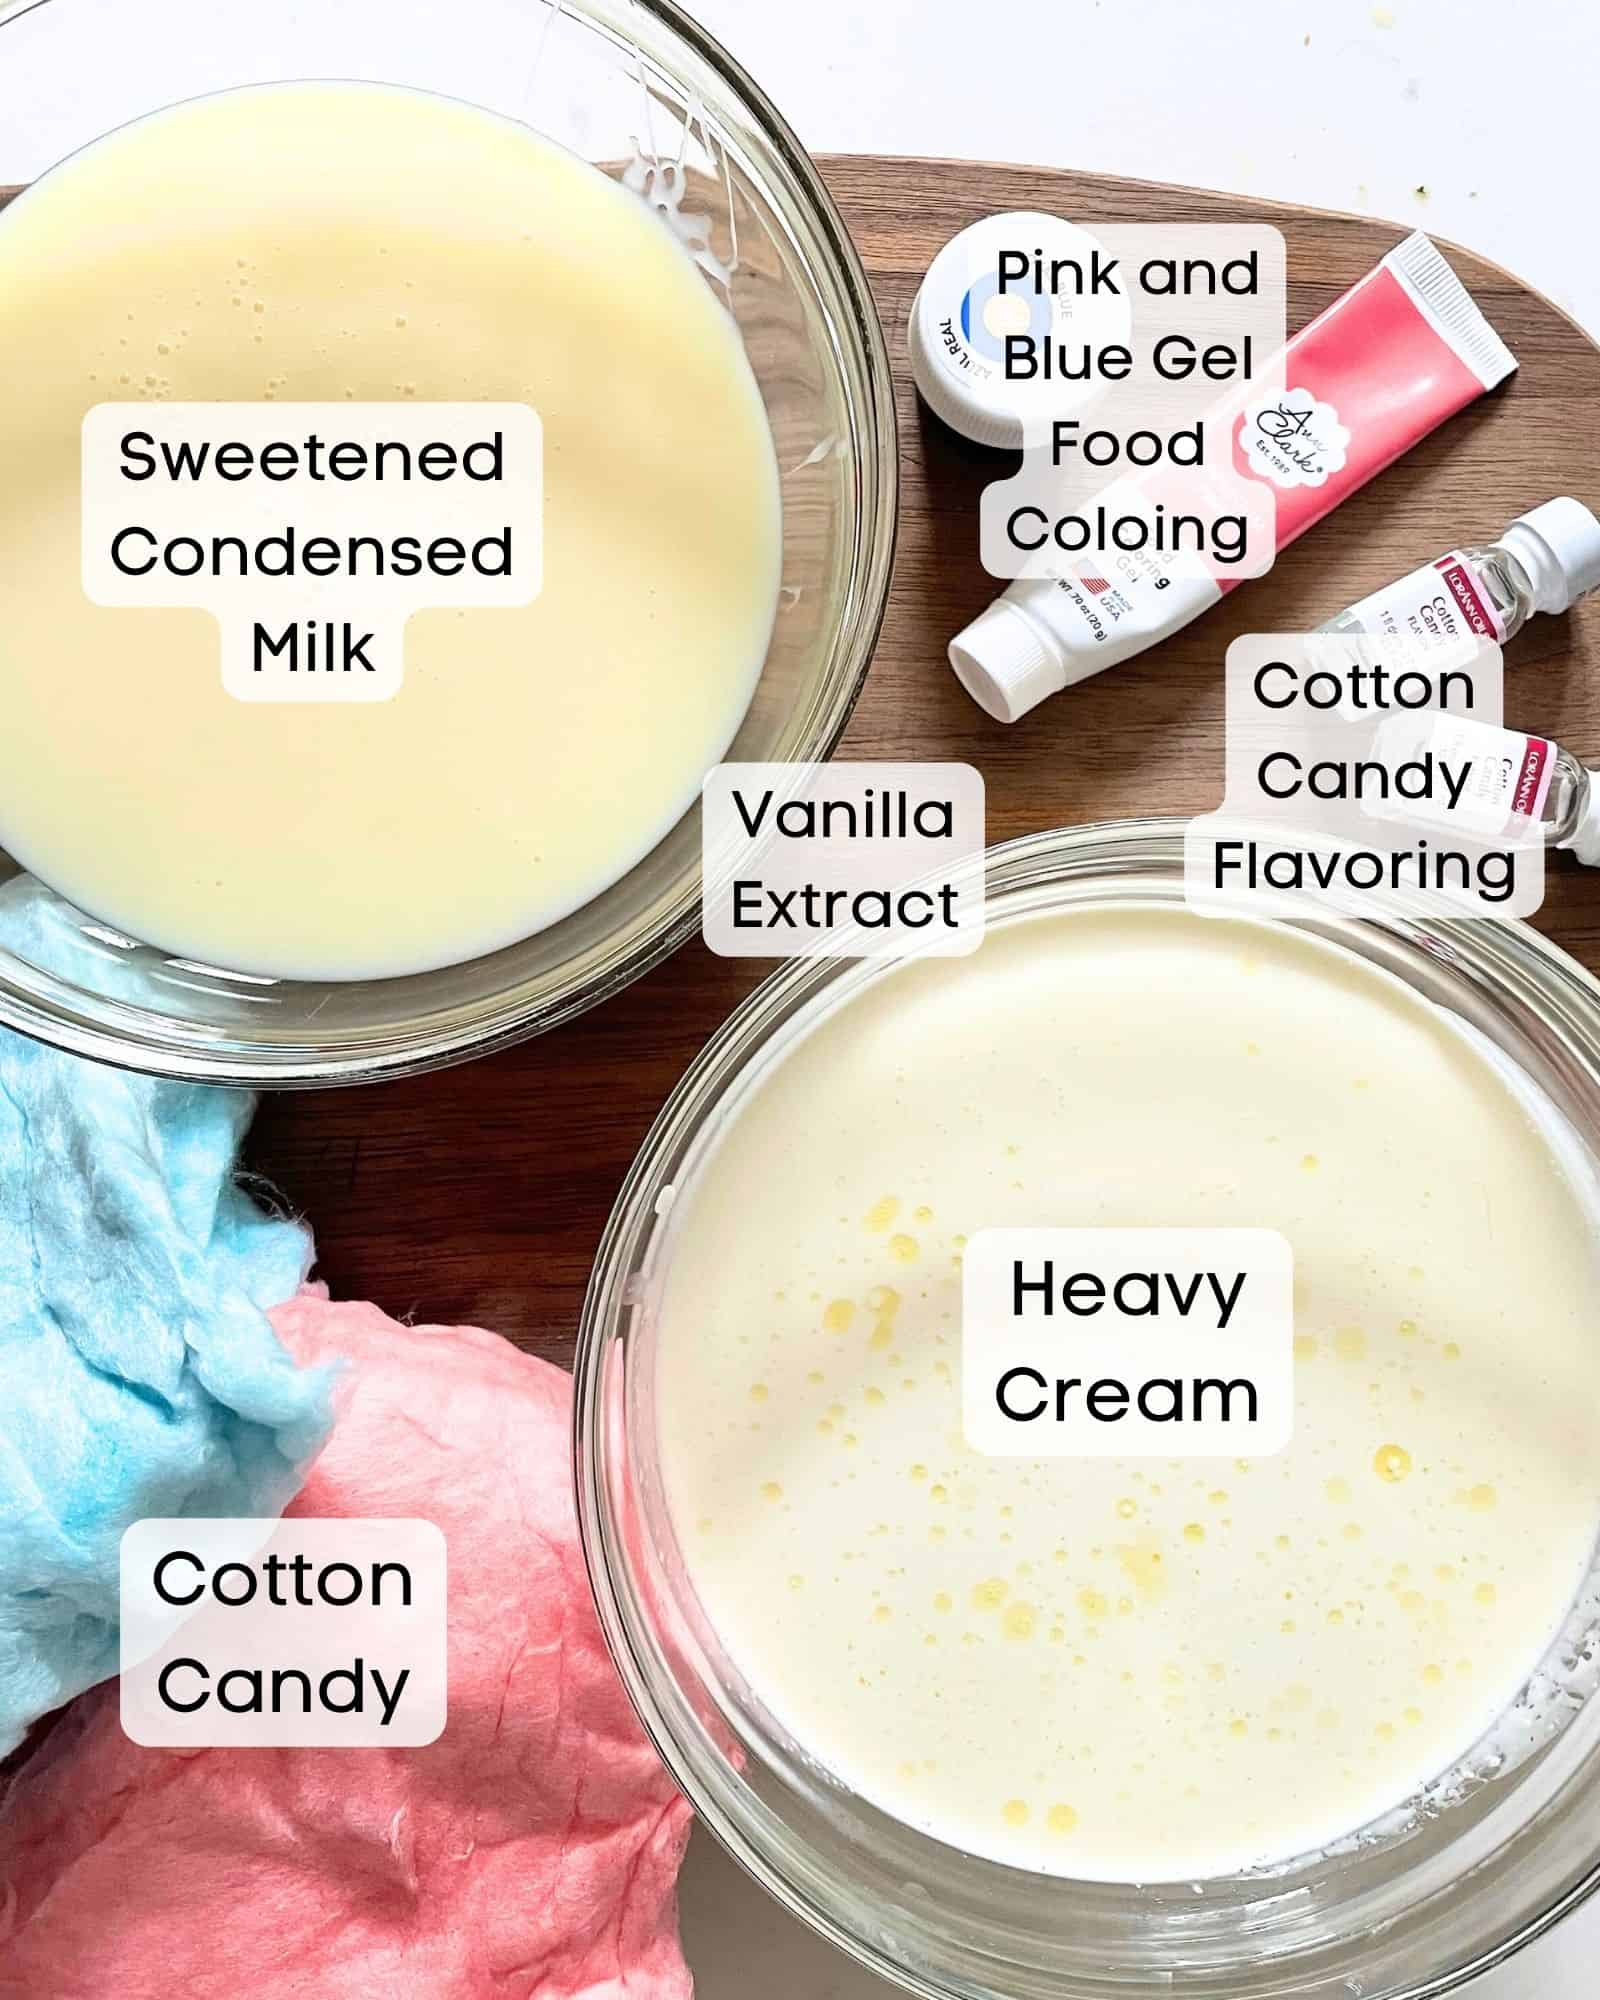 cotton candy ice cream ingredients - sweetened condensed milk, heavy cream, pink and blue food coloring, cotton candy, and vanilla extract.